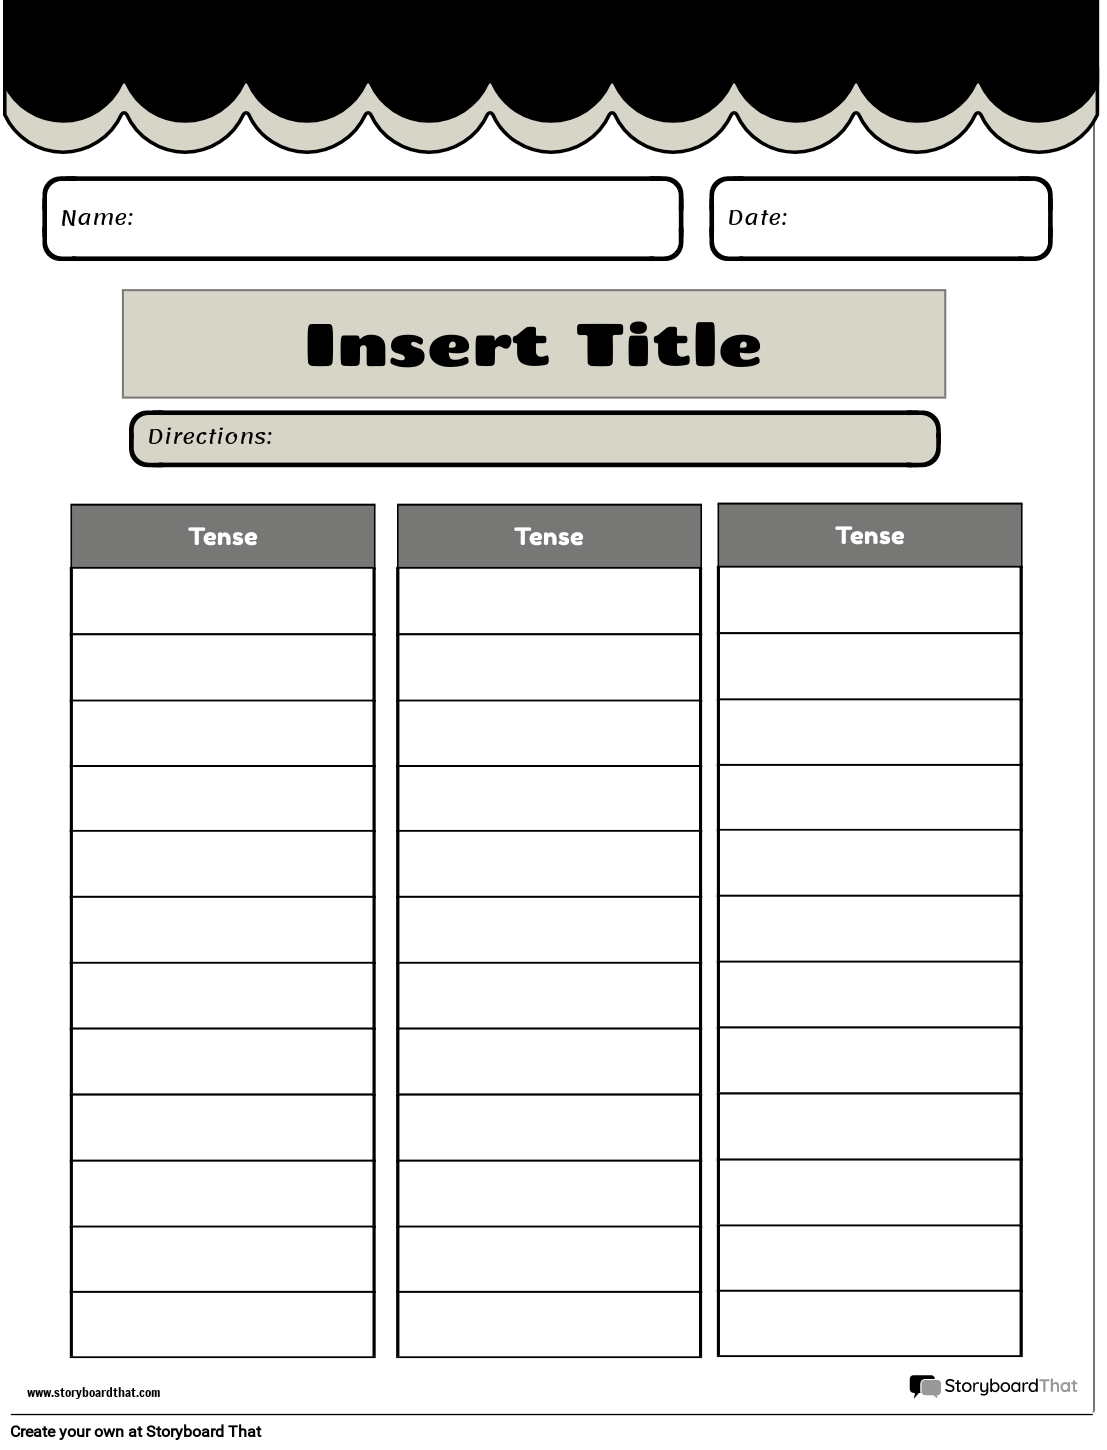 Complete the Verb Tense Table Black and White